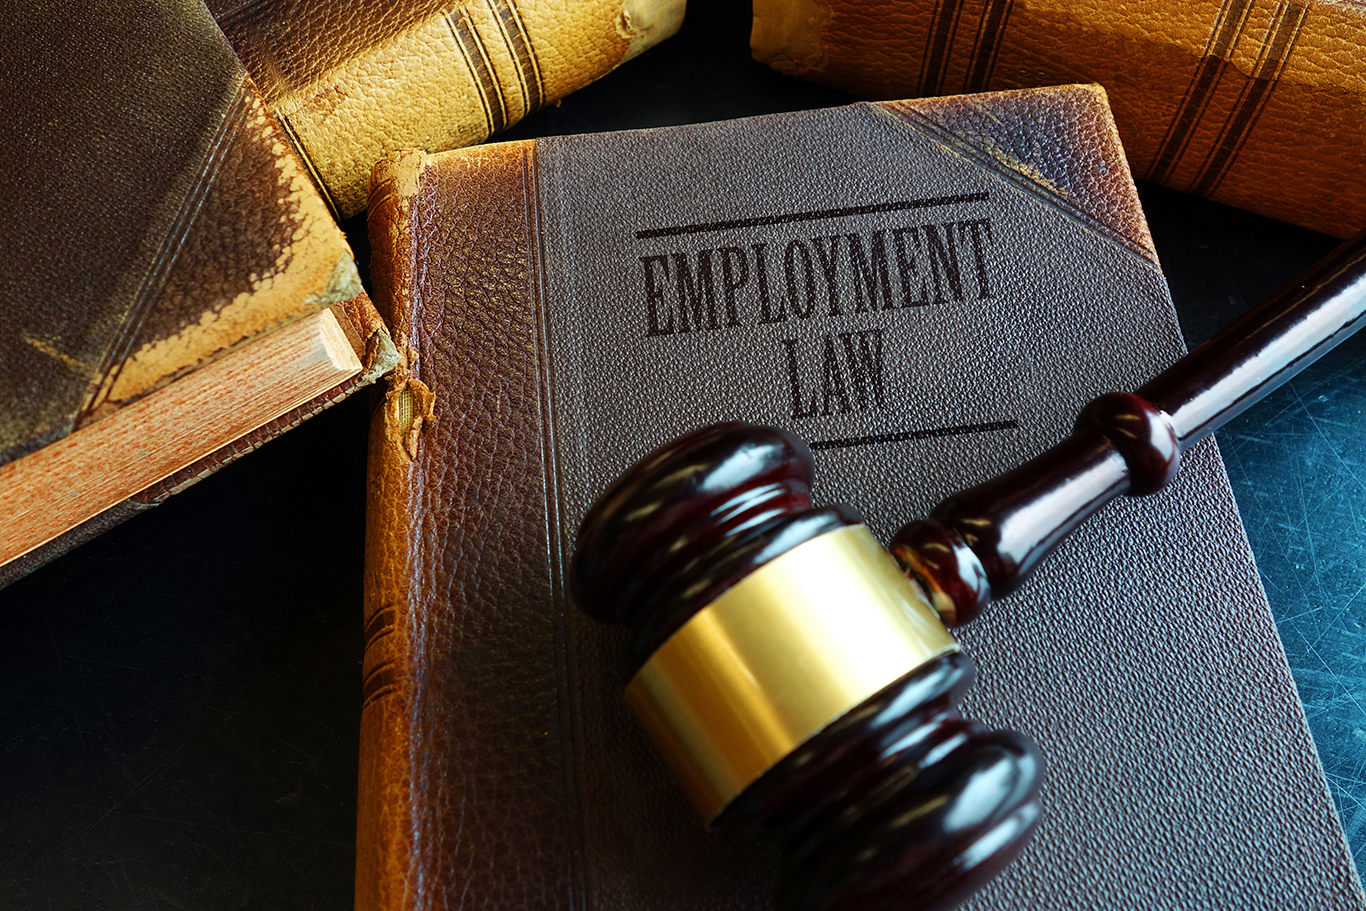 Damages under the California Fair Employment and Housing Act